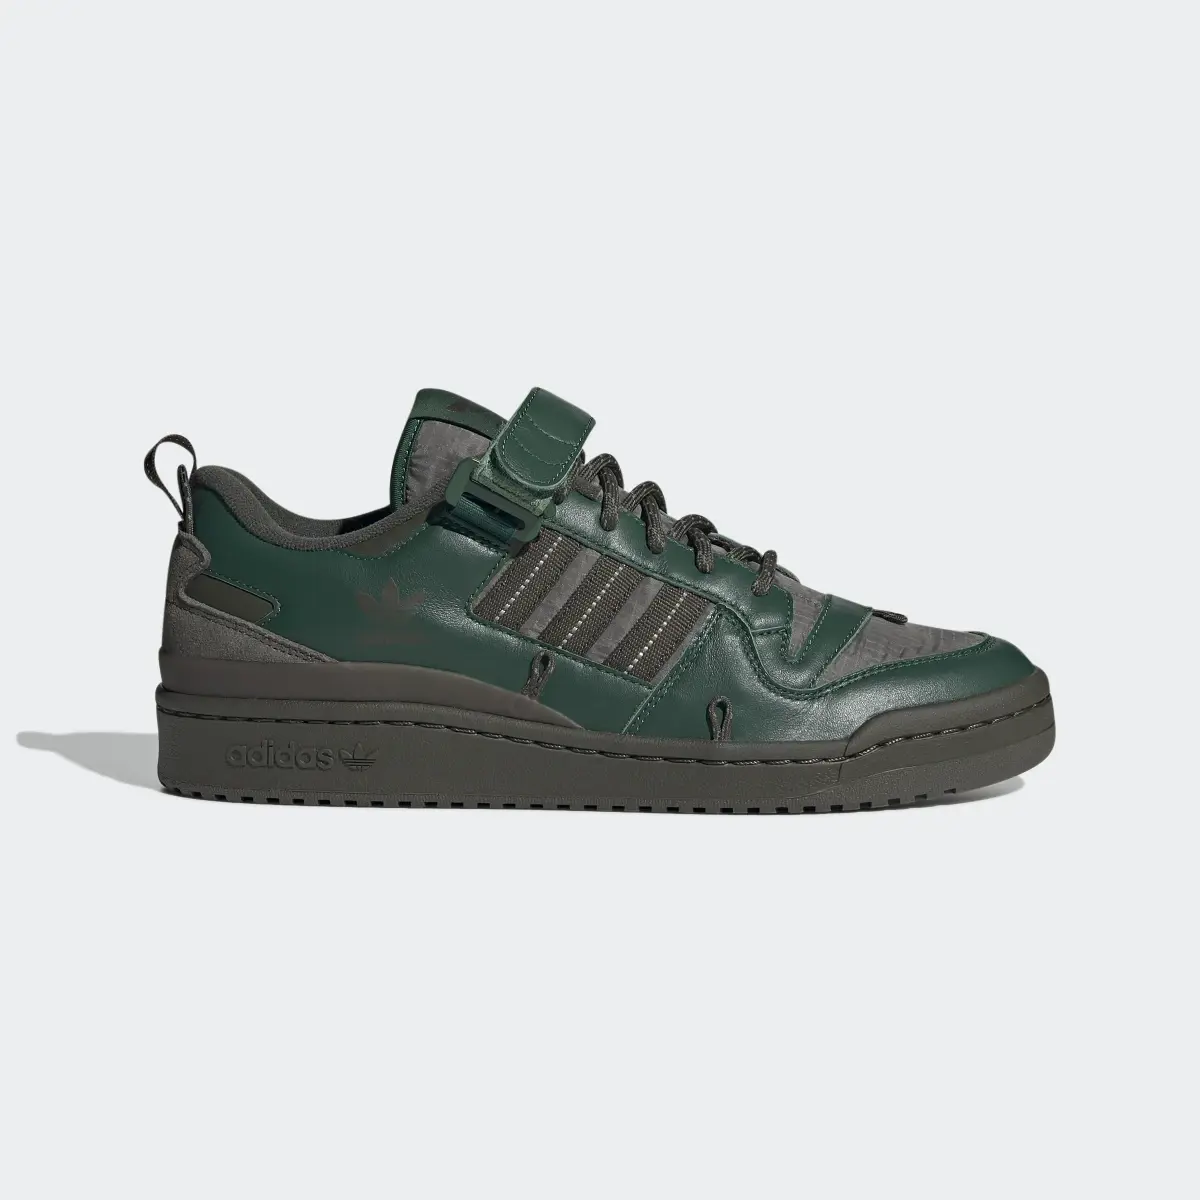 Adidas Forum 84 Camp Low Shoes. 2